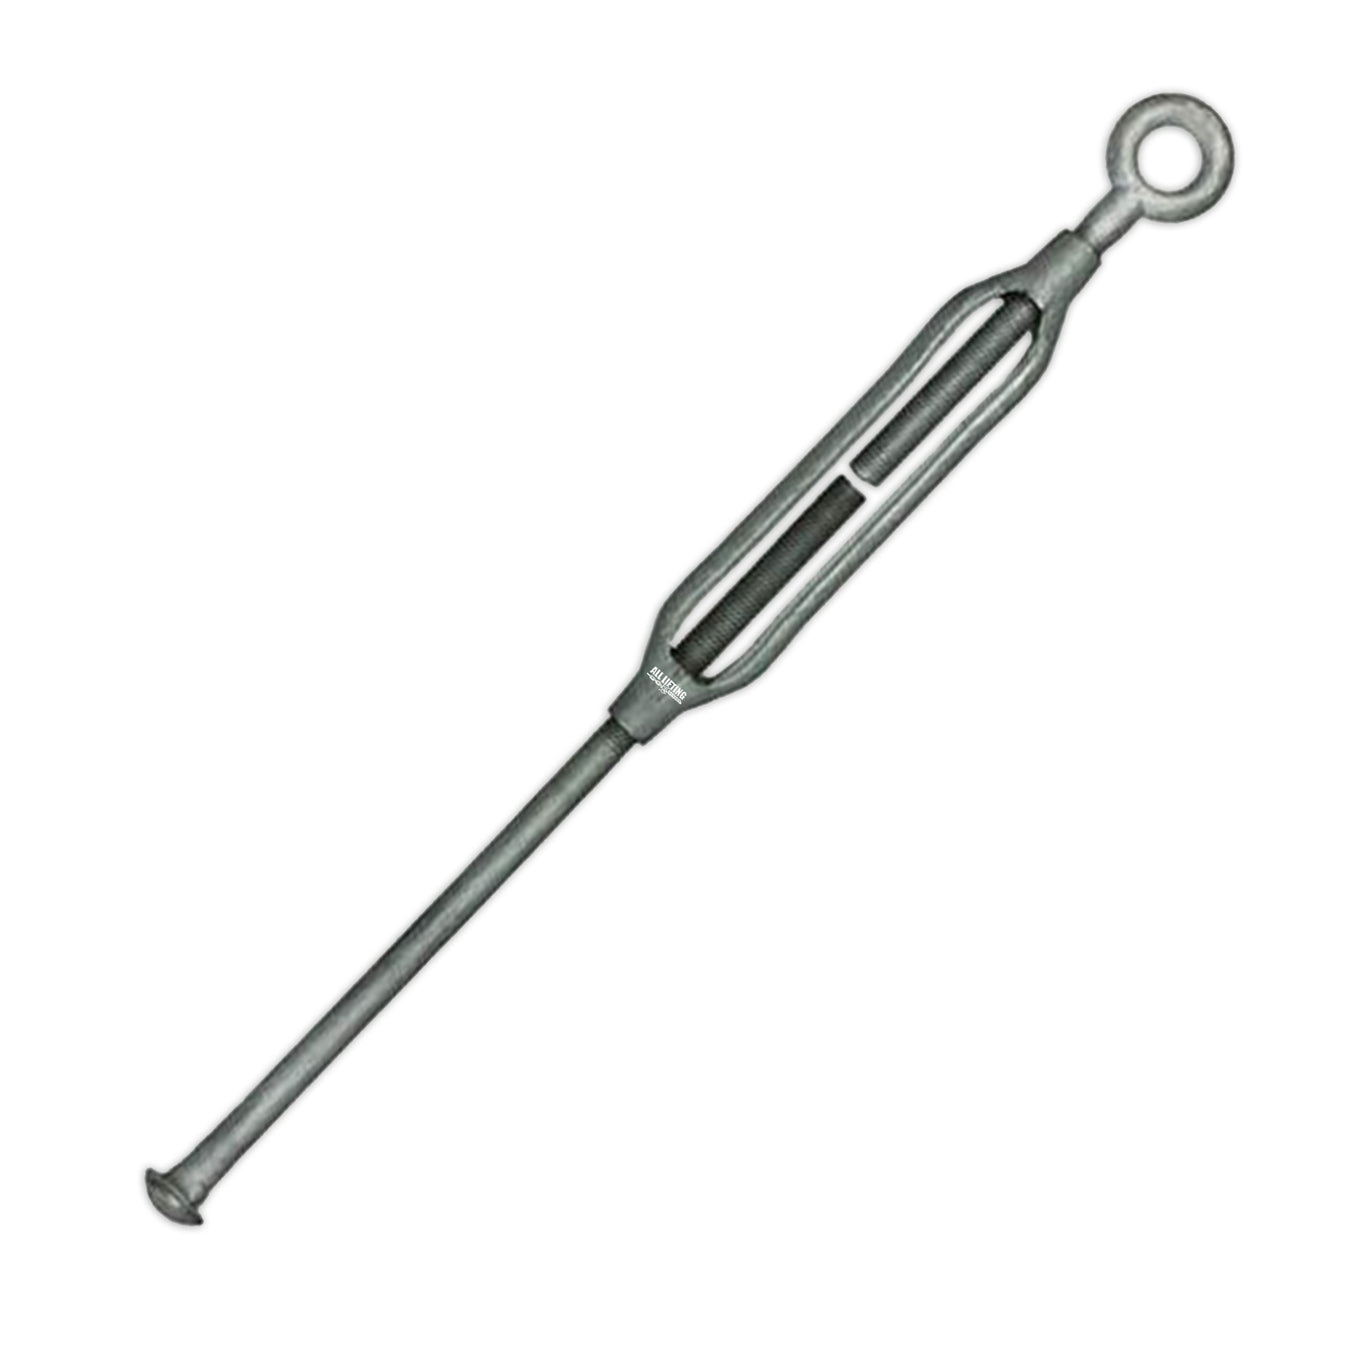 Rigging Screws and Turnbuckles